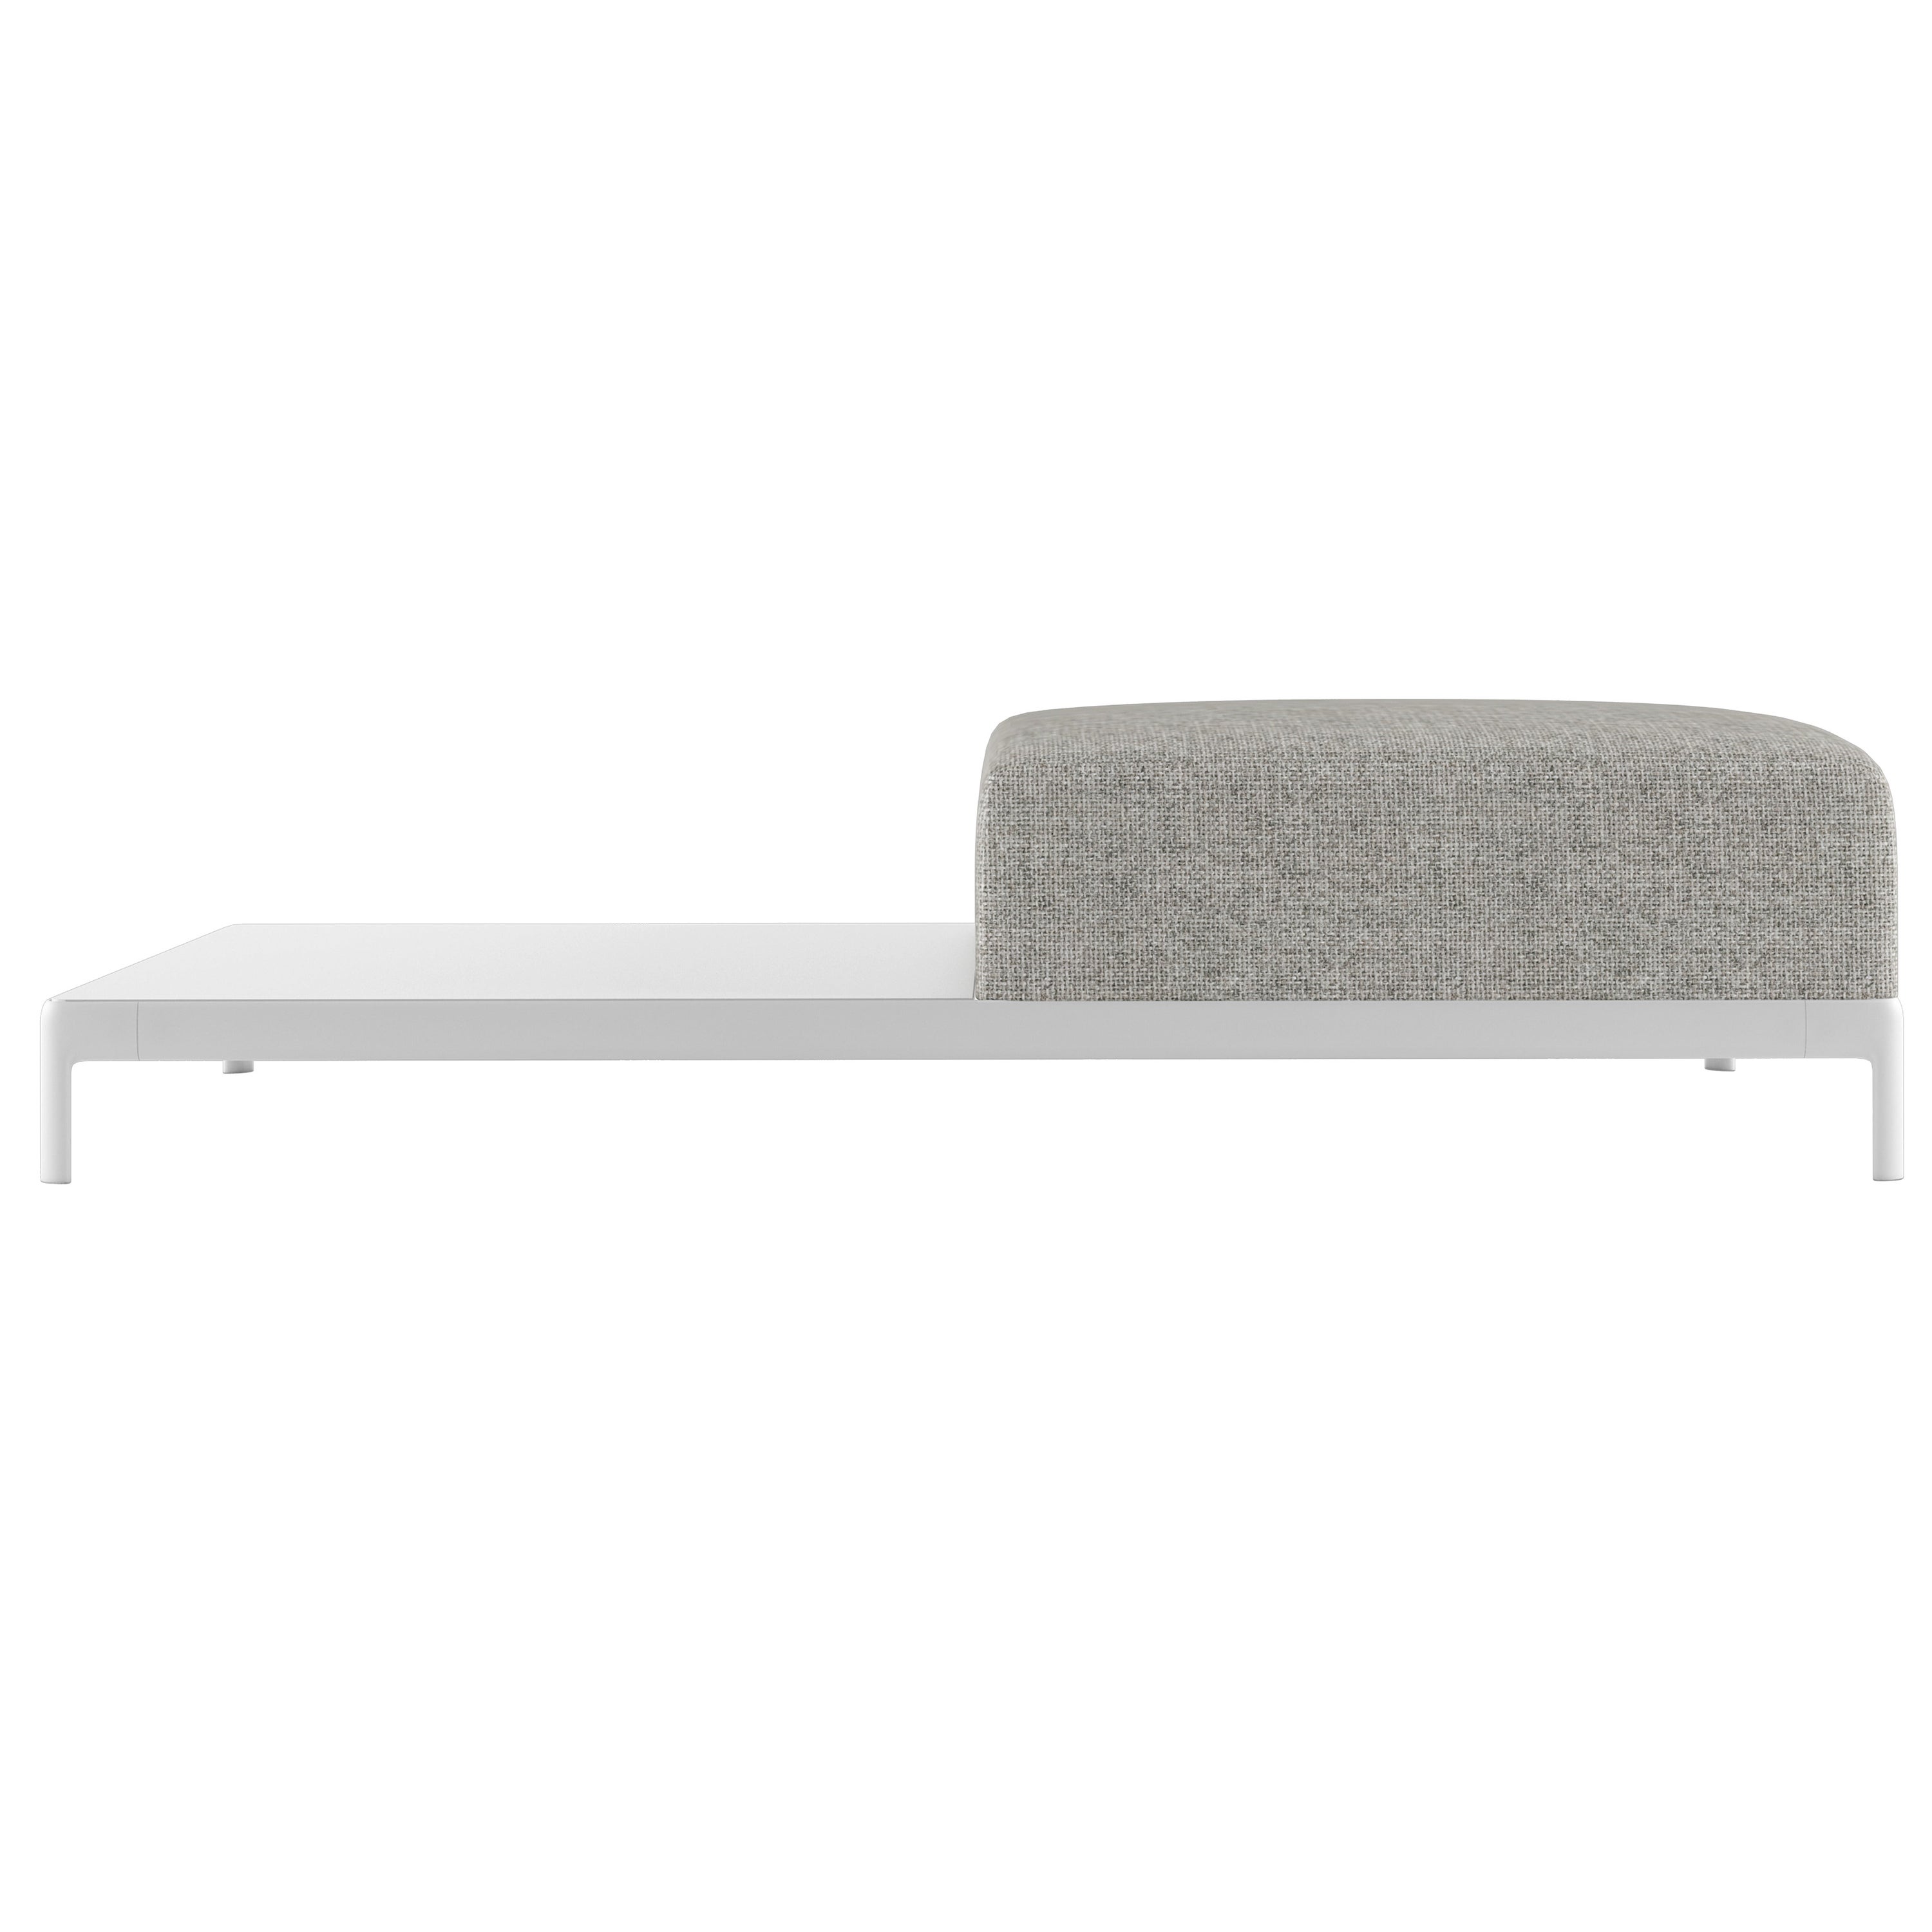 Alias P72 AluZen Soft Top Sofa Outdoor in Upholstery with Aluminium Frame For Sale